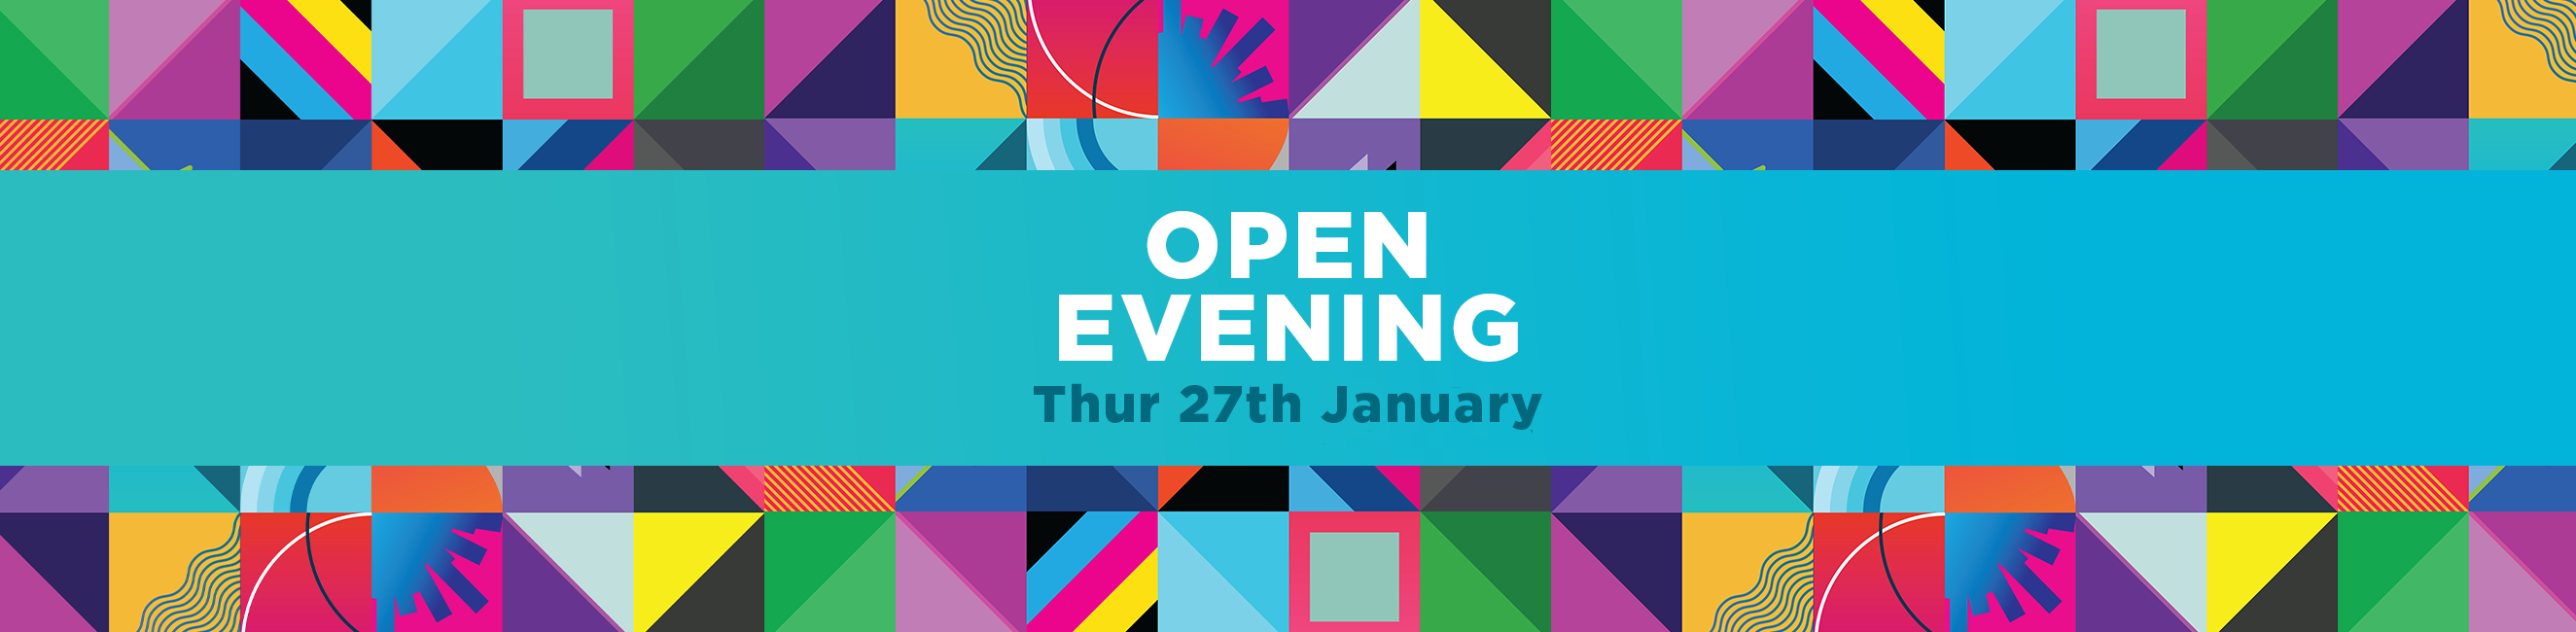 Open evening january 27th 2022